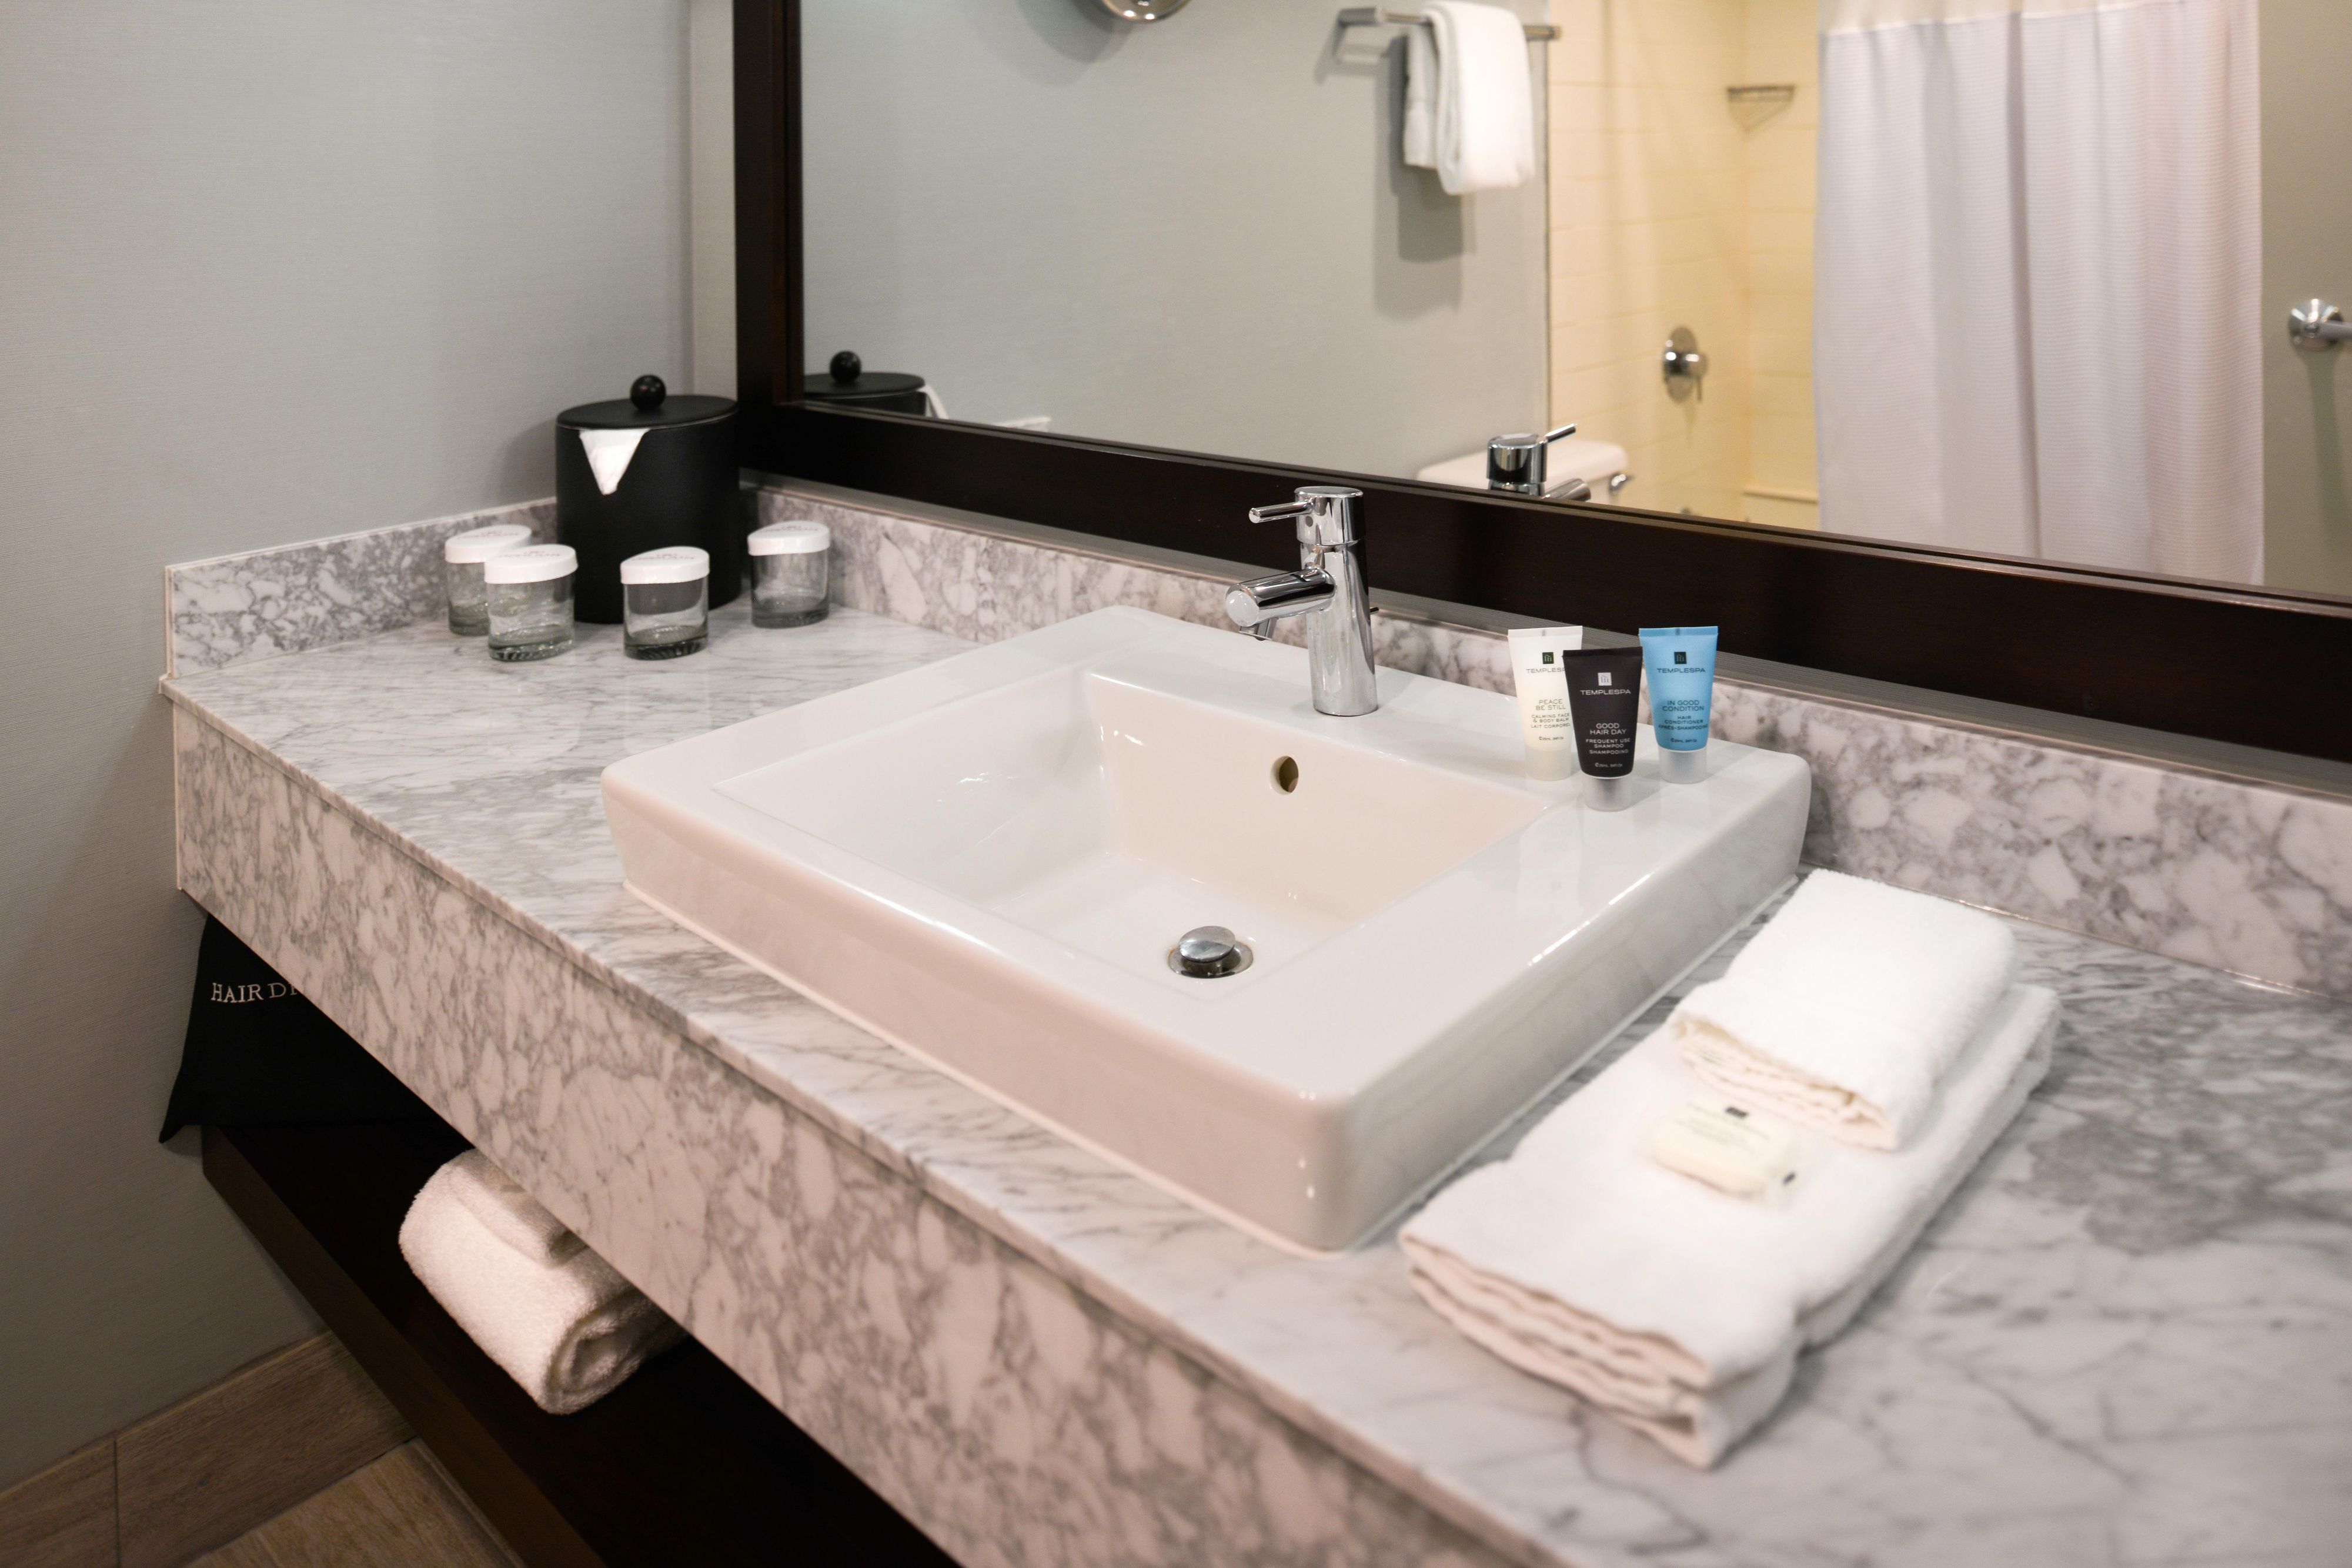 Guest Bathroom with upscale amenities